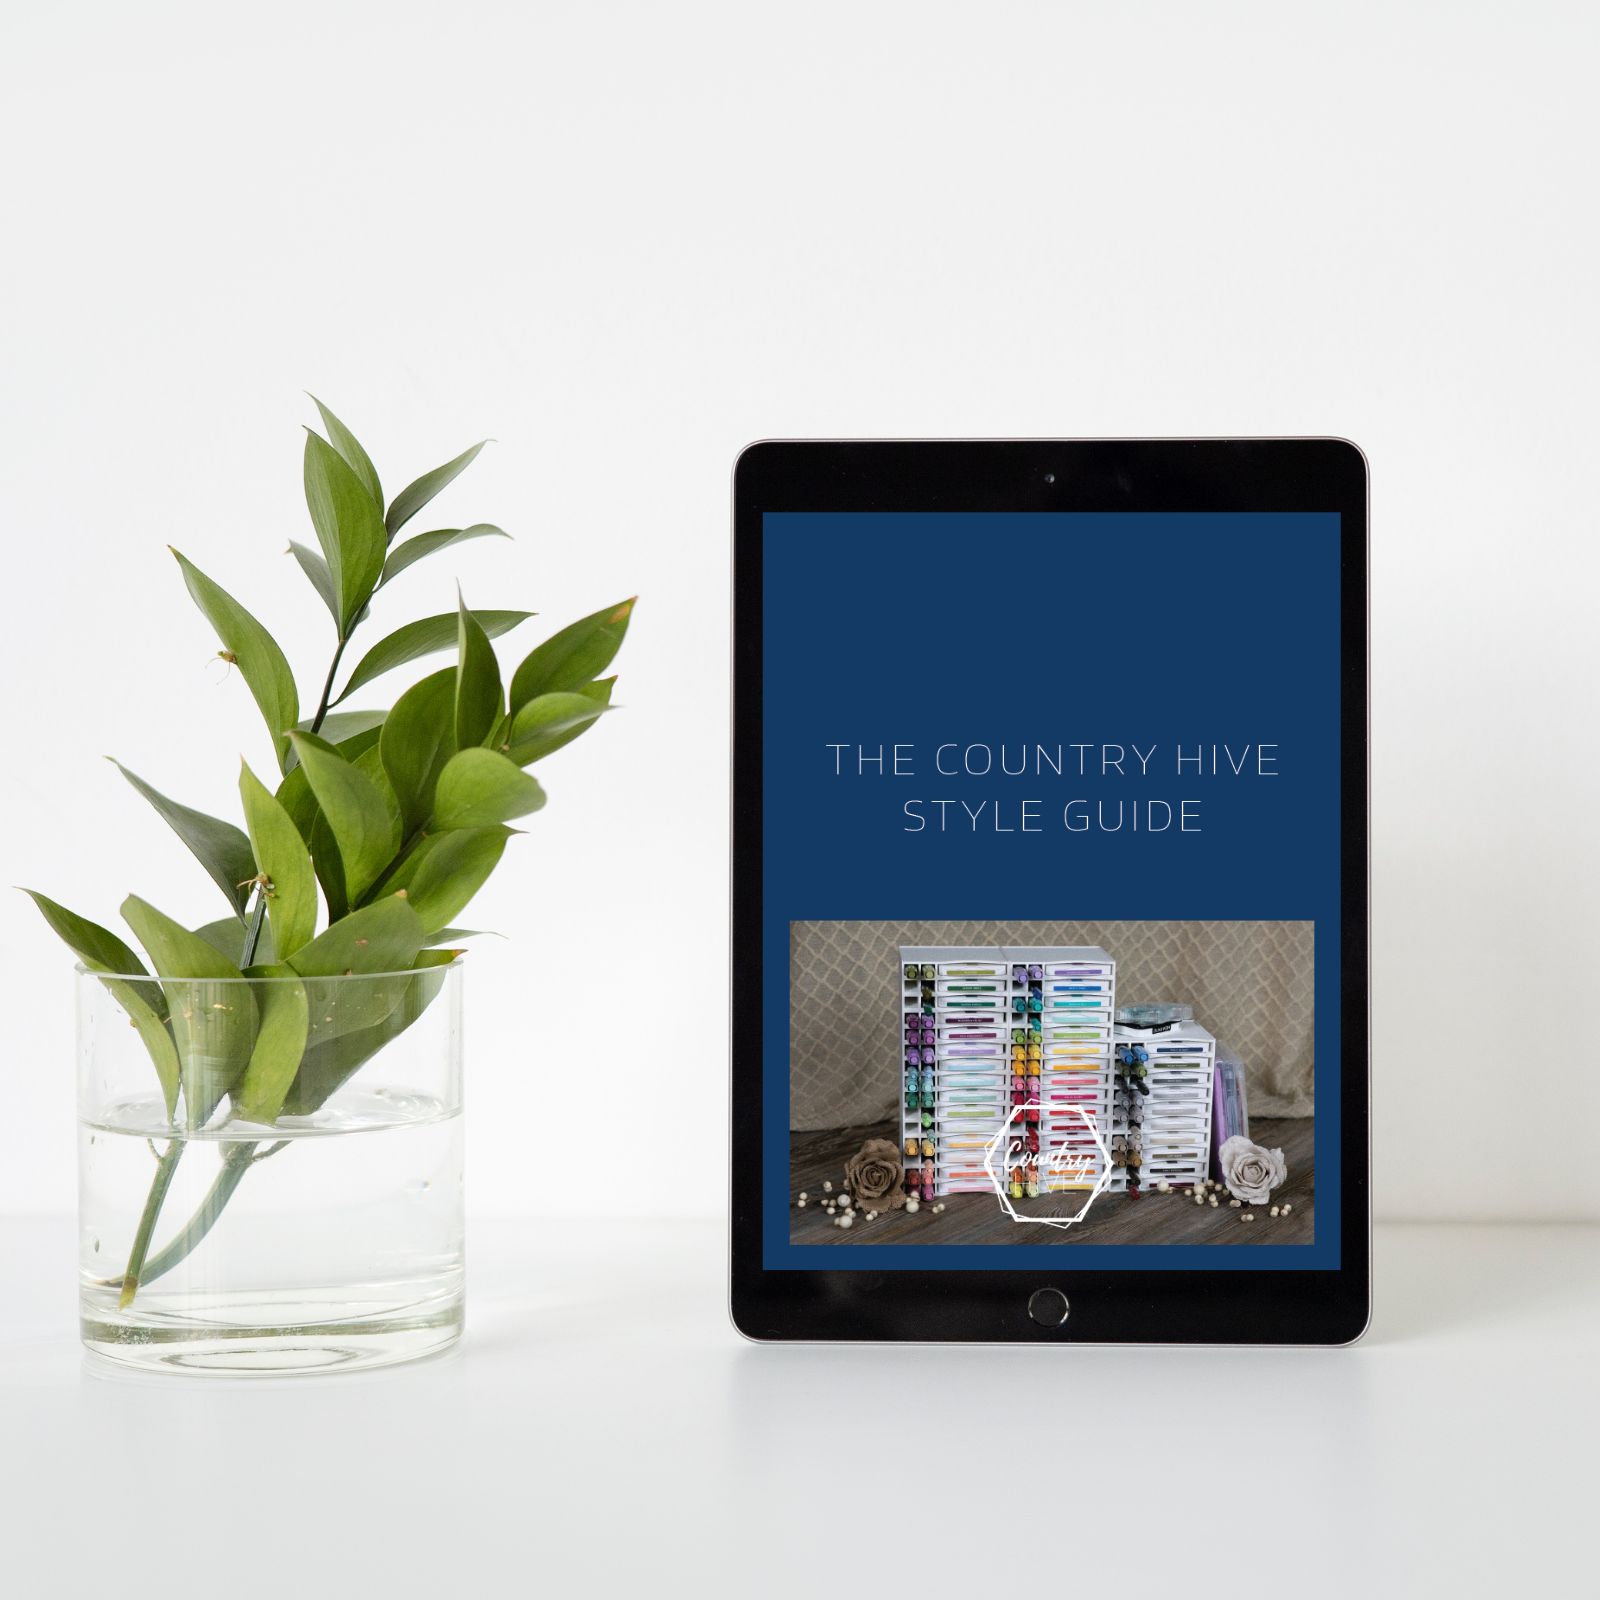 The Country Hive Style Guide Cover on a tablet